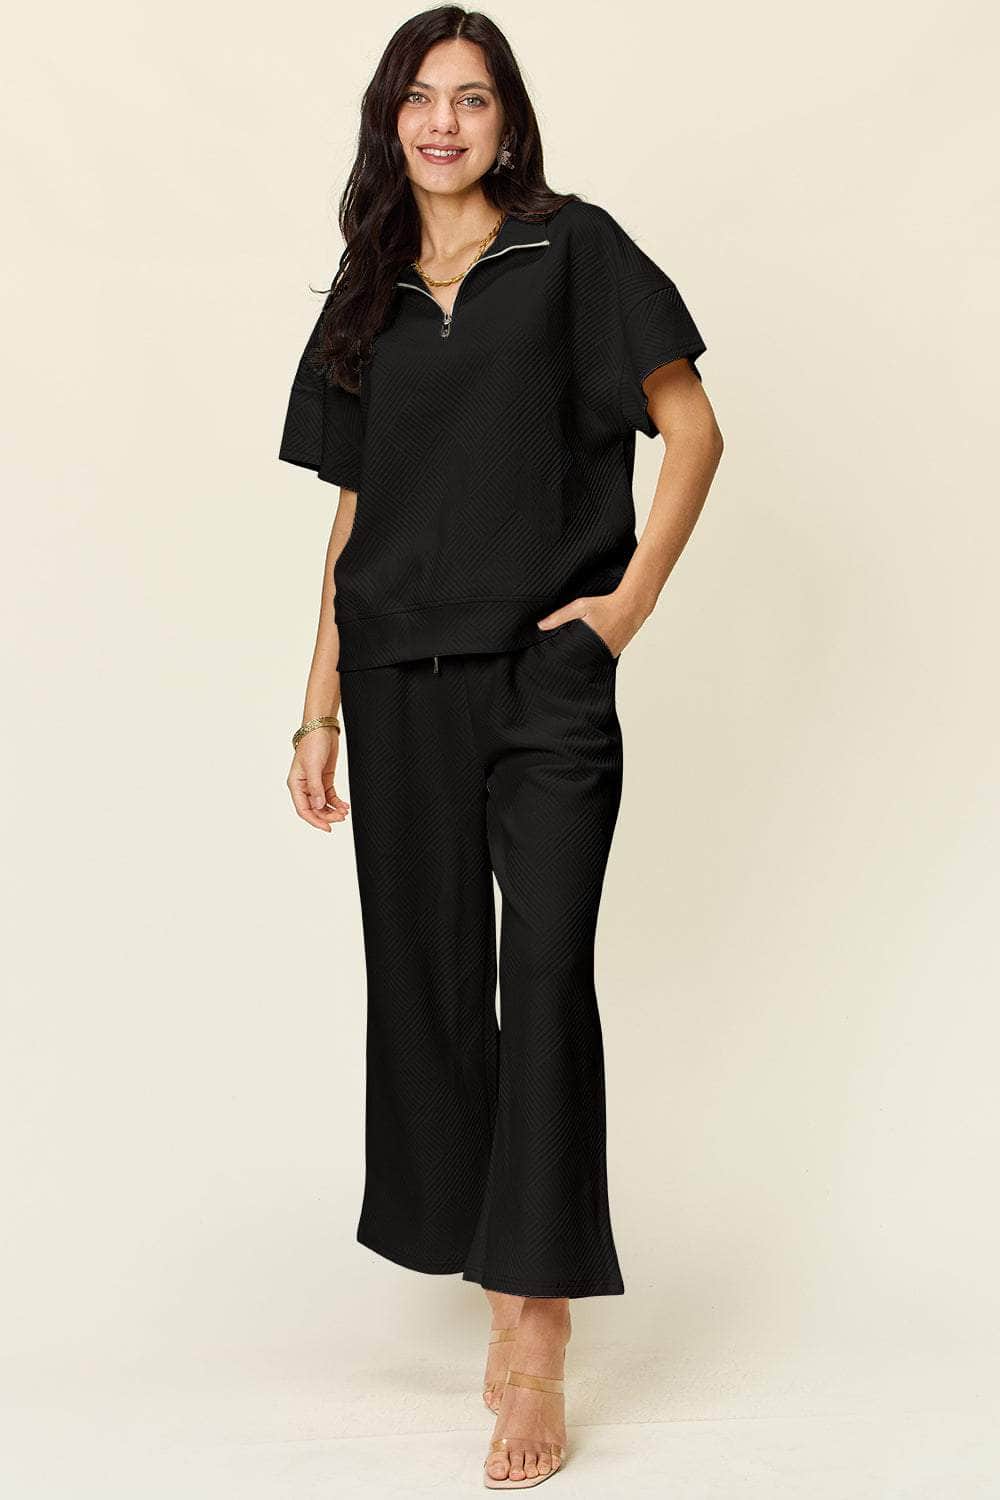 Double Take Full Size Texture Half Zip Short Sleeve Top and Pants Set Black / S